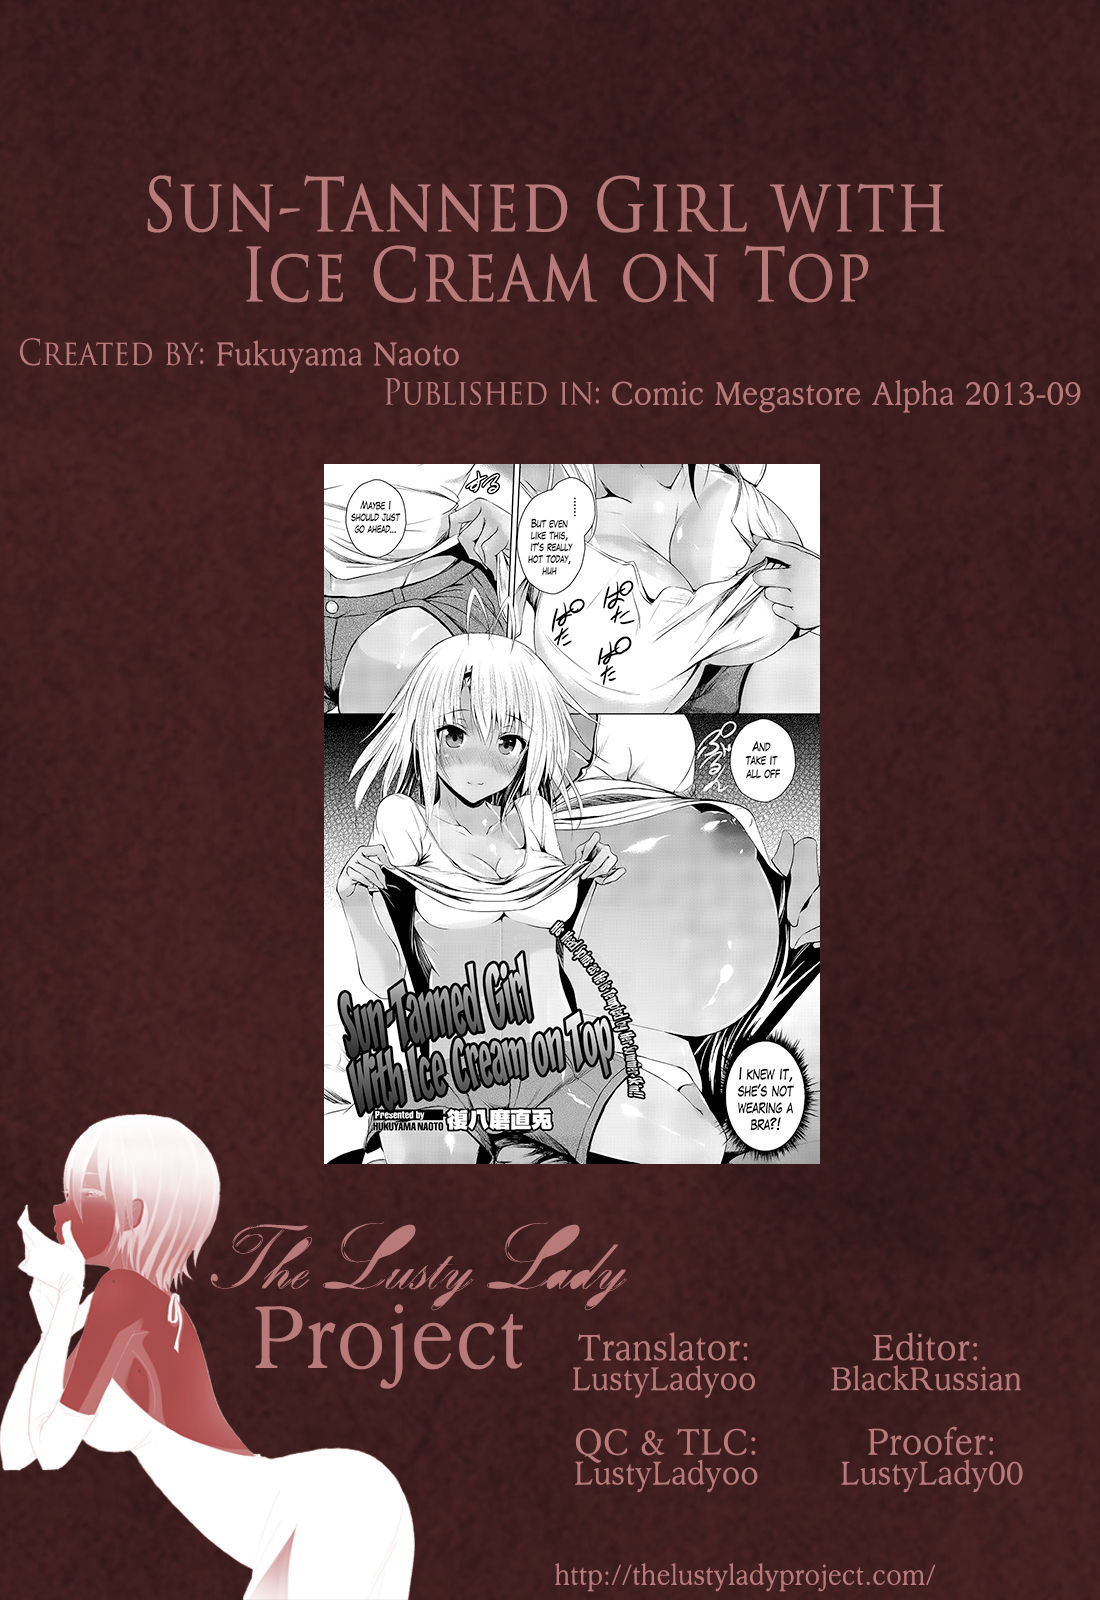 [Fukuyama Naoto] Hiyake Musume Ice Gake | Sun-Tanned Girl with Ice Cream on Top (COMIC Megastore Alpha 2013-09) [English] [The Lusty Lady Project] [復八磨直兎] 日焼け娘アイスがけ (コミックメガストアα 2013年9月号) [英訳]